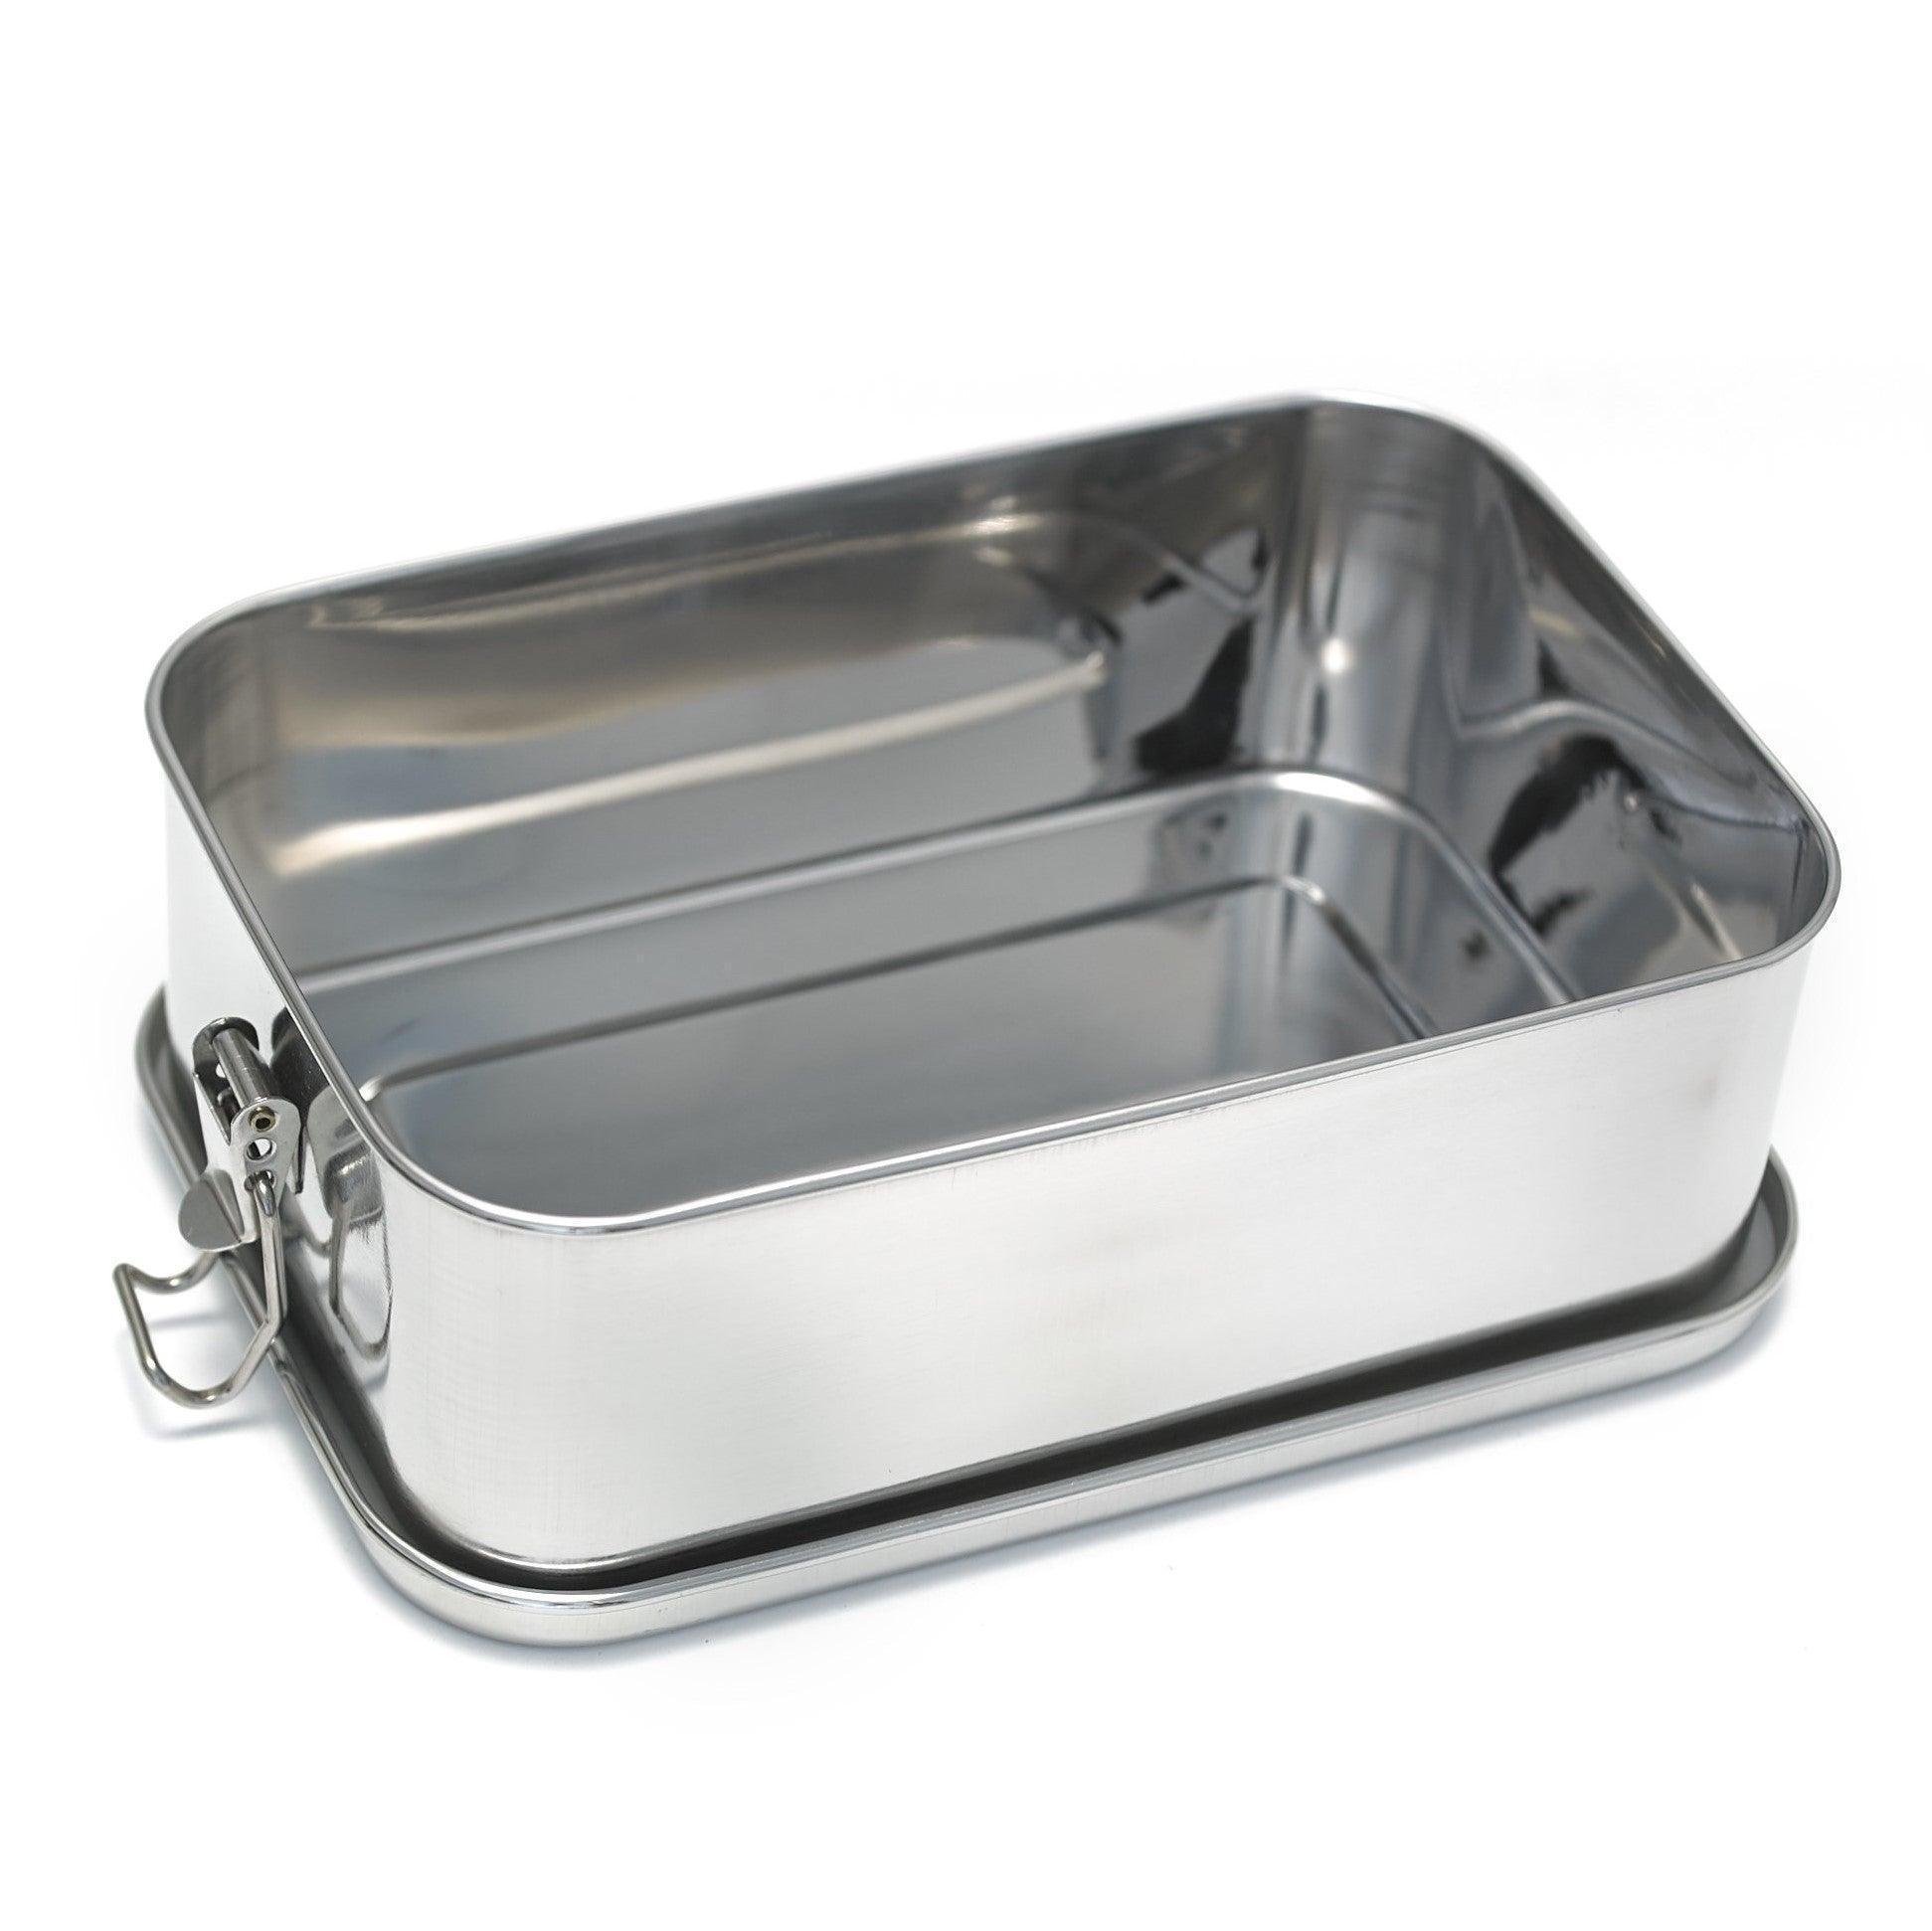 Large Leakproof Rectangular Lunch Box | Stainless Steel - Meals In Steel 